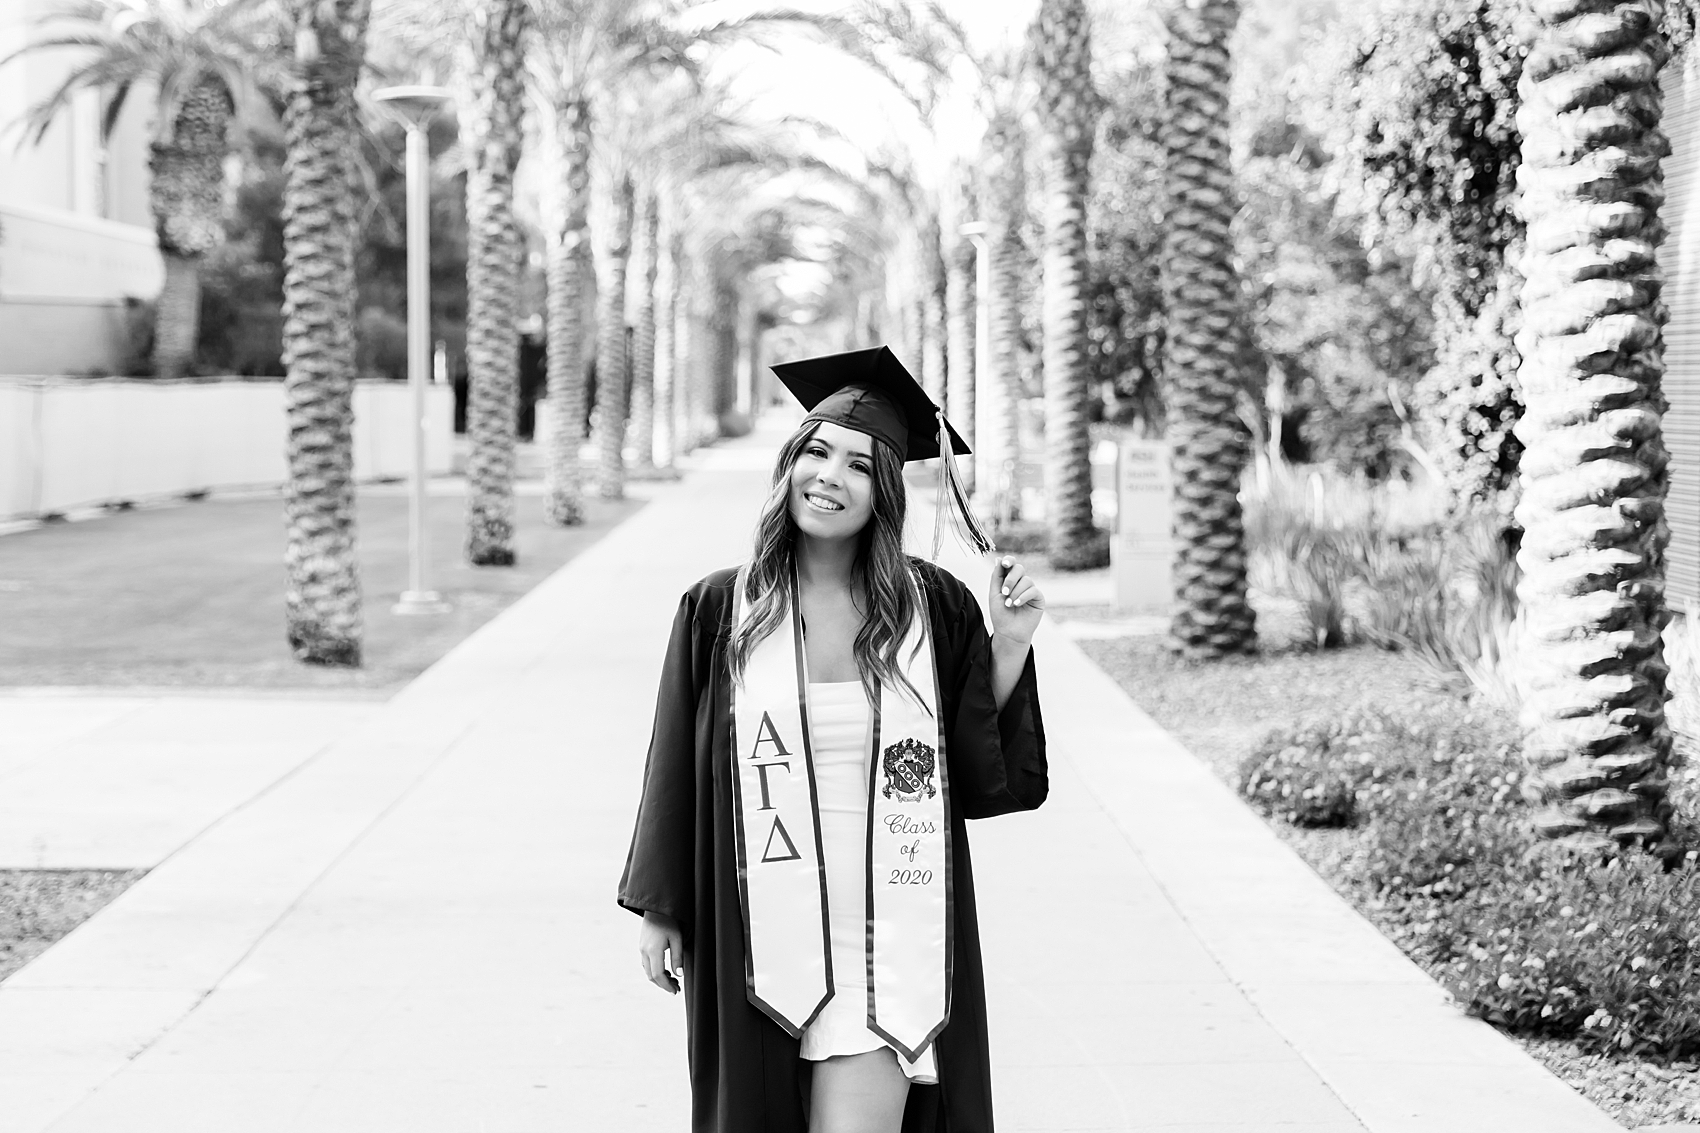 Leah Hope Photography | Phoenix Scottsdale Tempe Arizona | ASU Arizona State University | College Senior Pictures | Graduation Photos | Cap and Gown | Old Main and Palm Lane | Papago Park Desert Scenery | What to Wear Seniors | How to Pose | Senior Photographer